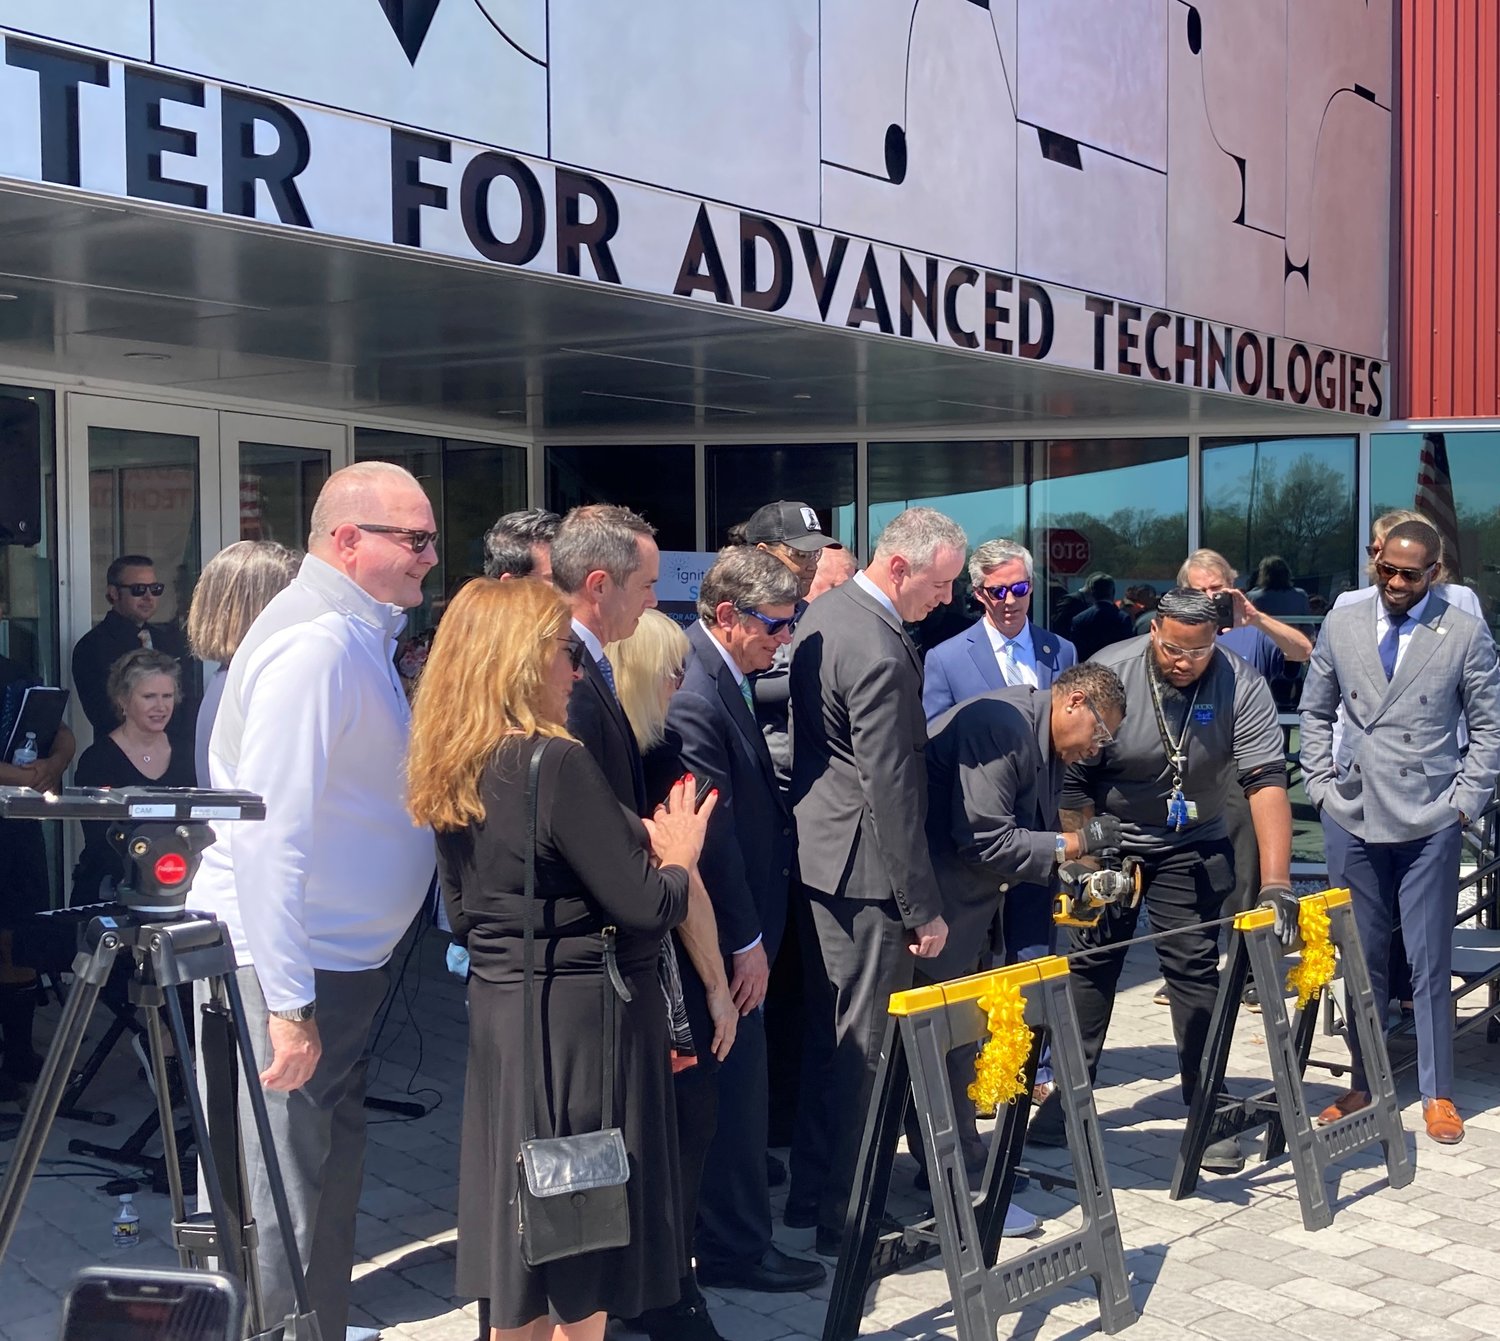 Bucks County Community College officials called the new Center for Advanced Technologies an "investment in the future of the workforce and financial health of the Bucks County region.”